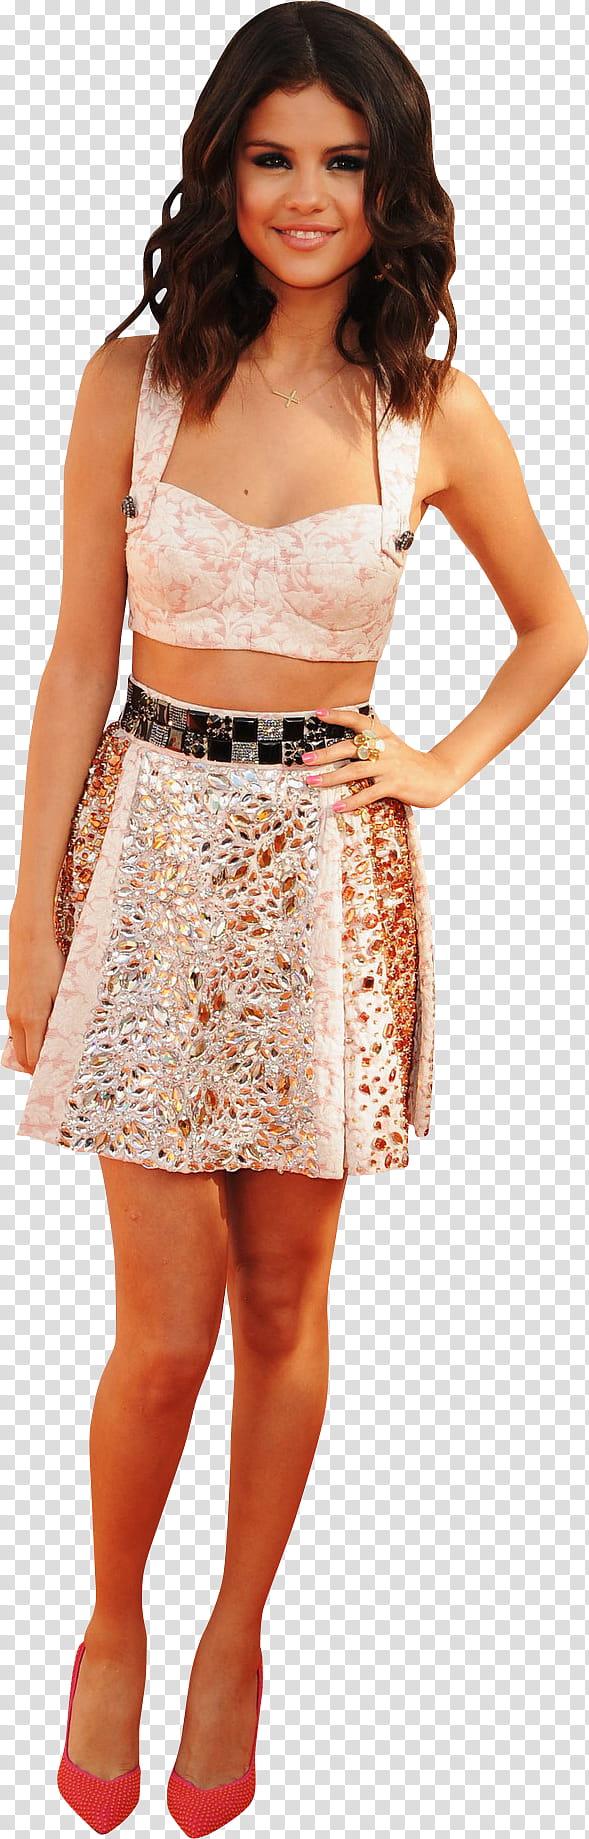 Kelly Kelly and Selena Gomez and Mana transparent background PNG clipart